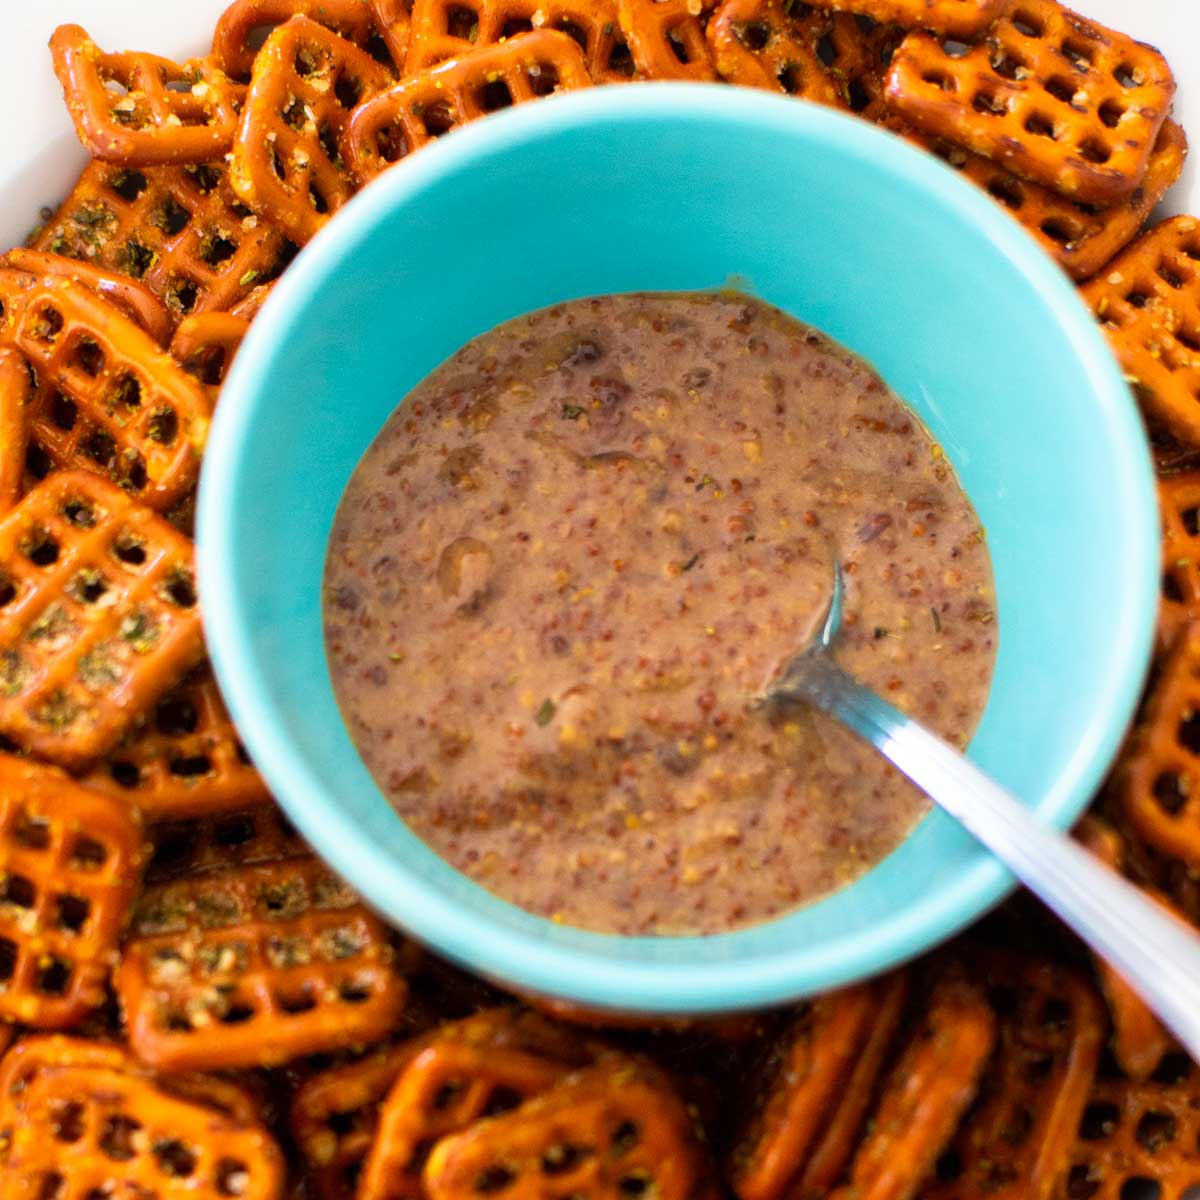 A blue bowl filled with raspberry mustard has a spoon and is surrounded by seasoned pretzels.